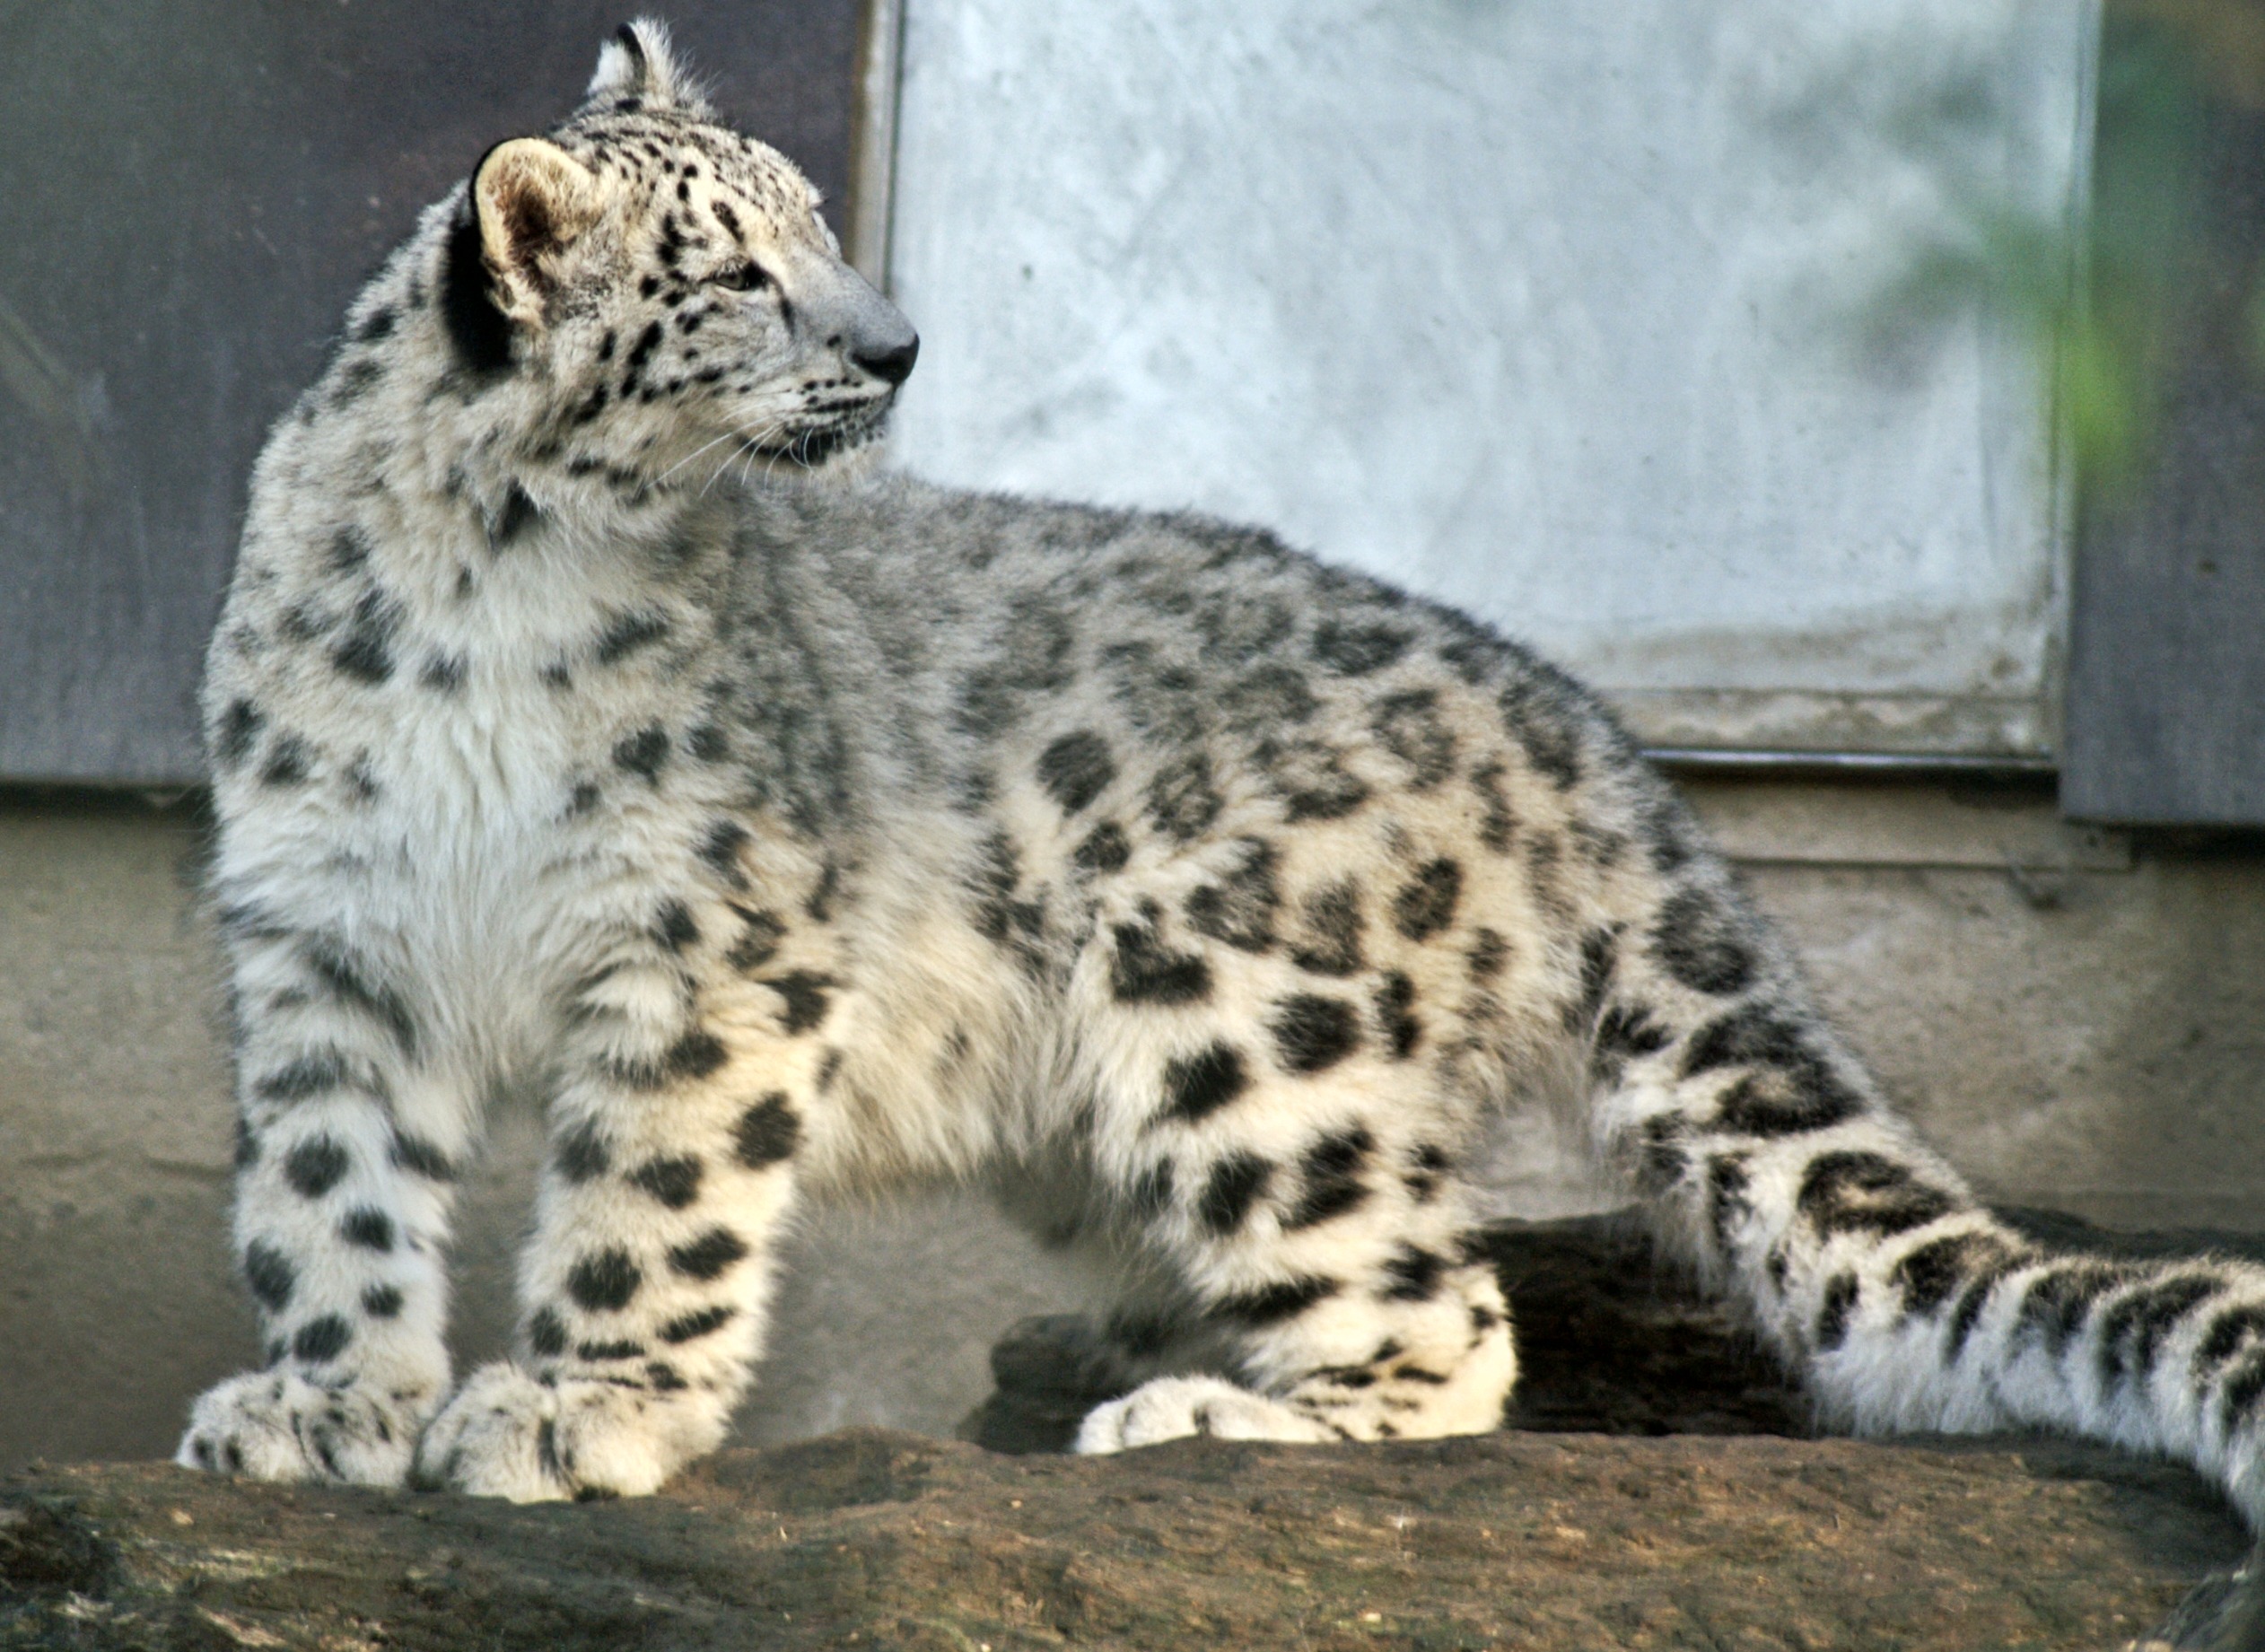 File:Curious Snow leopard.jpg - Wikimedia Commons